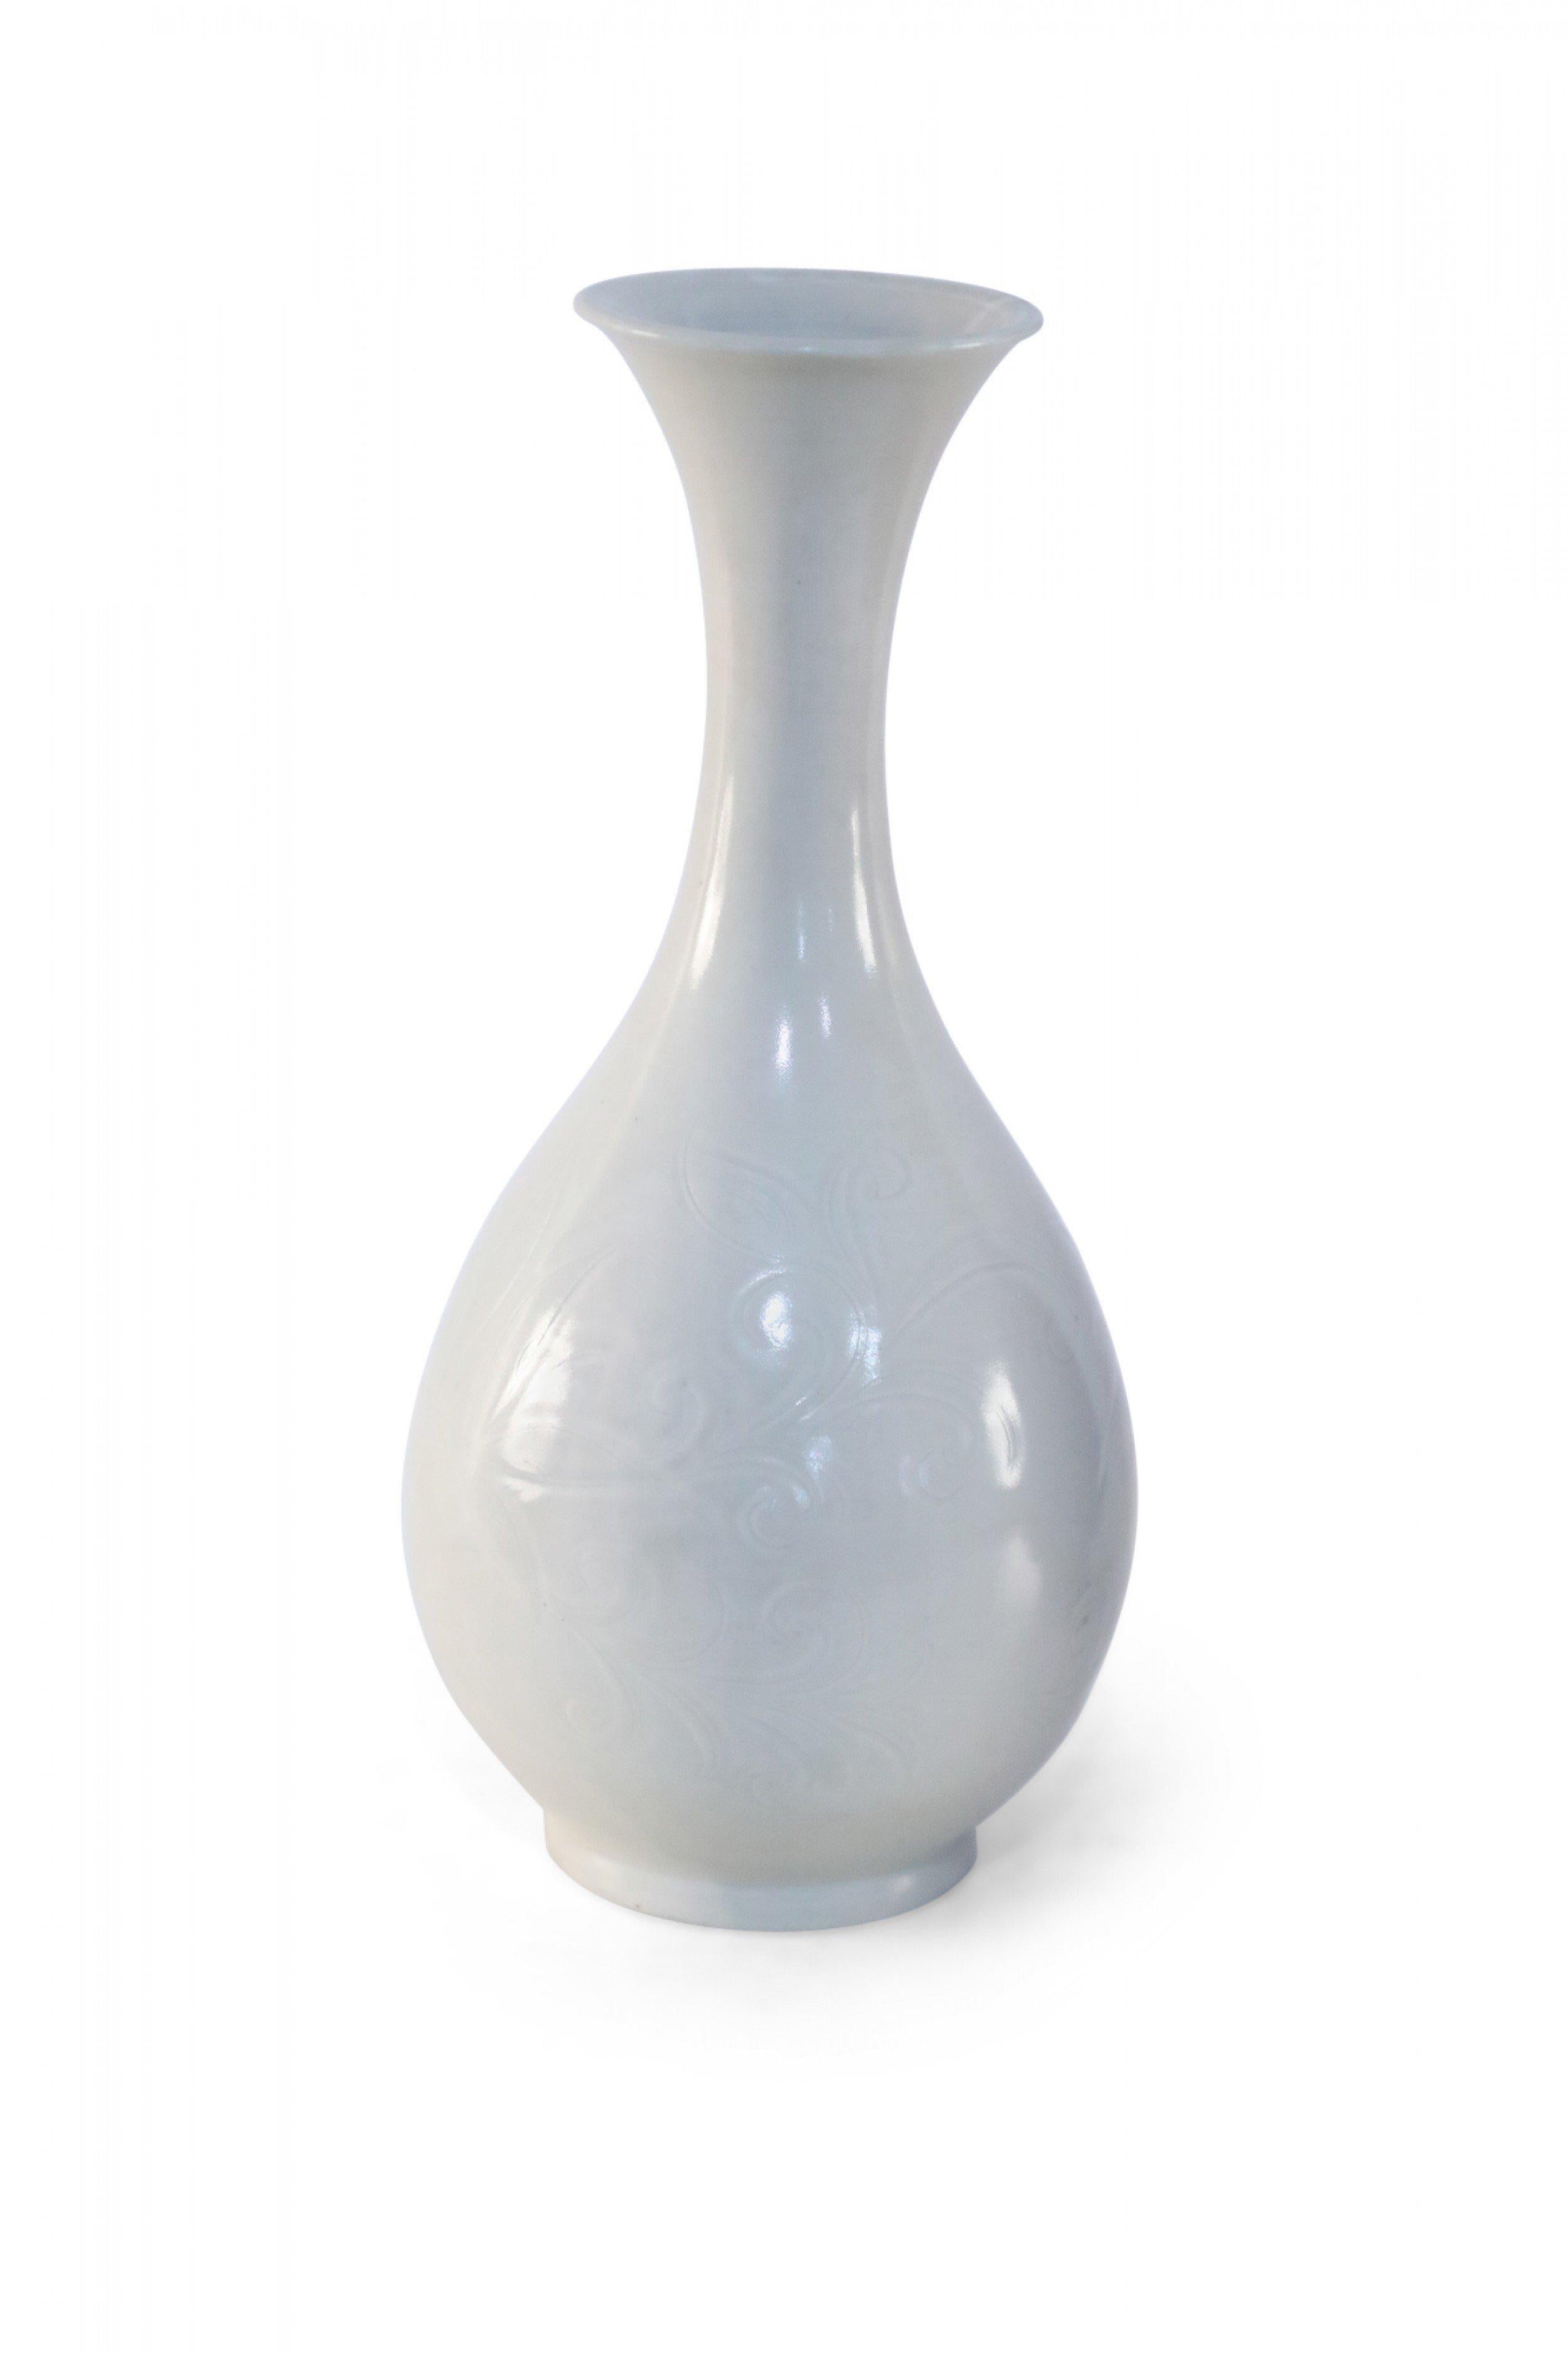 Chinese off-white porcelain vase with a pear shape carved in a tonal, scrolling botanical pattern (date mark on bottom, see photos).
 